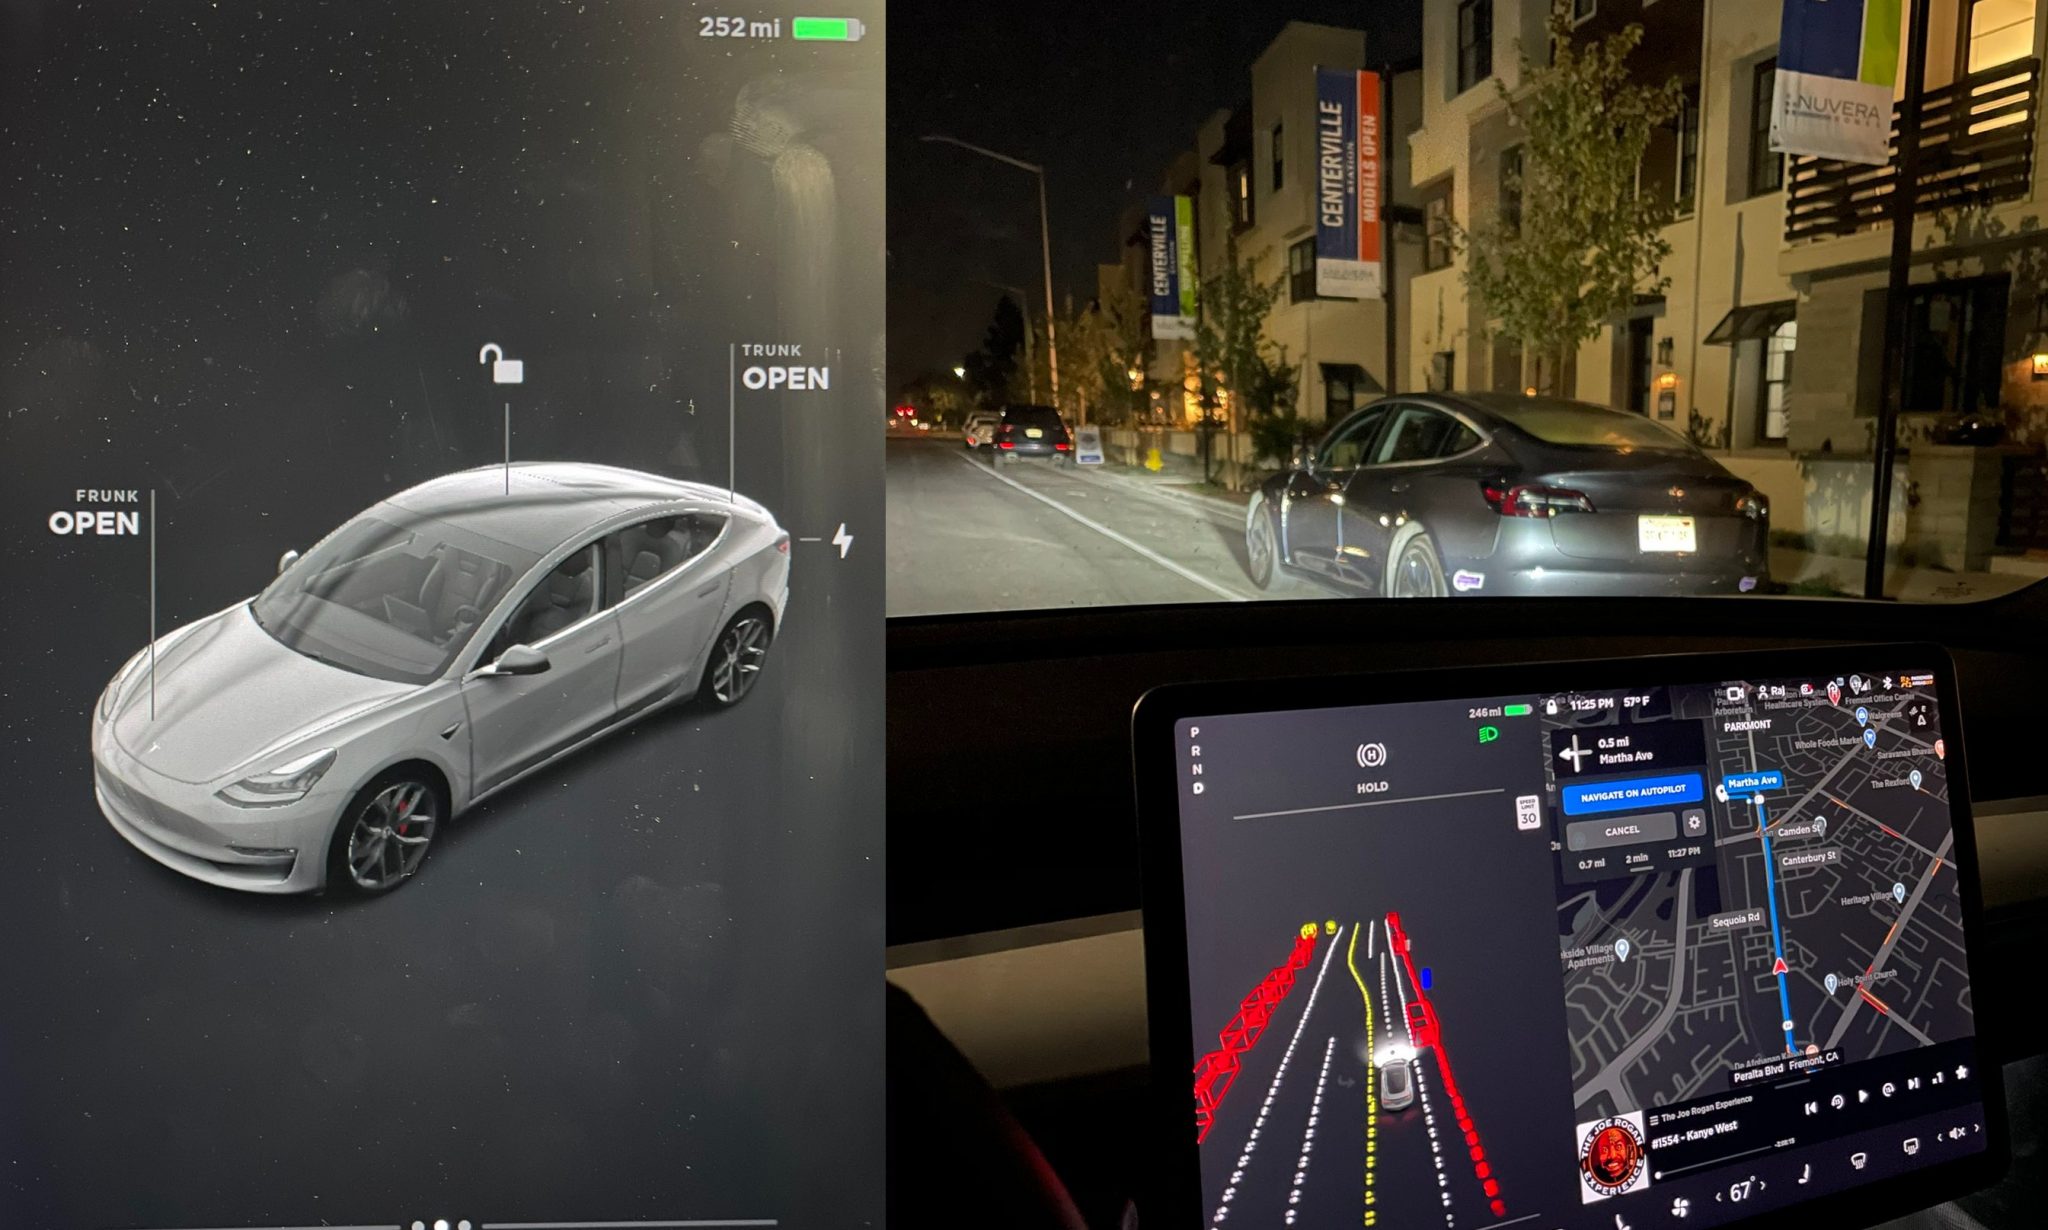 Learn how to conveniently charge a tesla. First look at Tesla's new UI and driving visualizations for FSD beta in